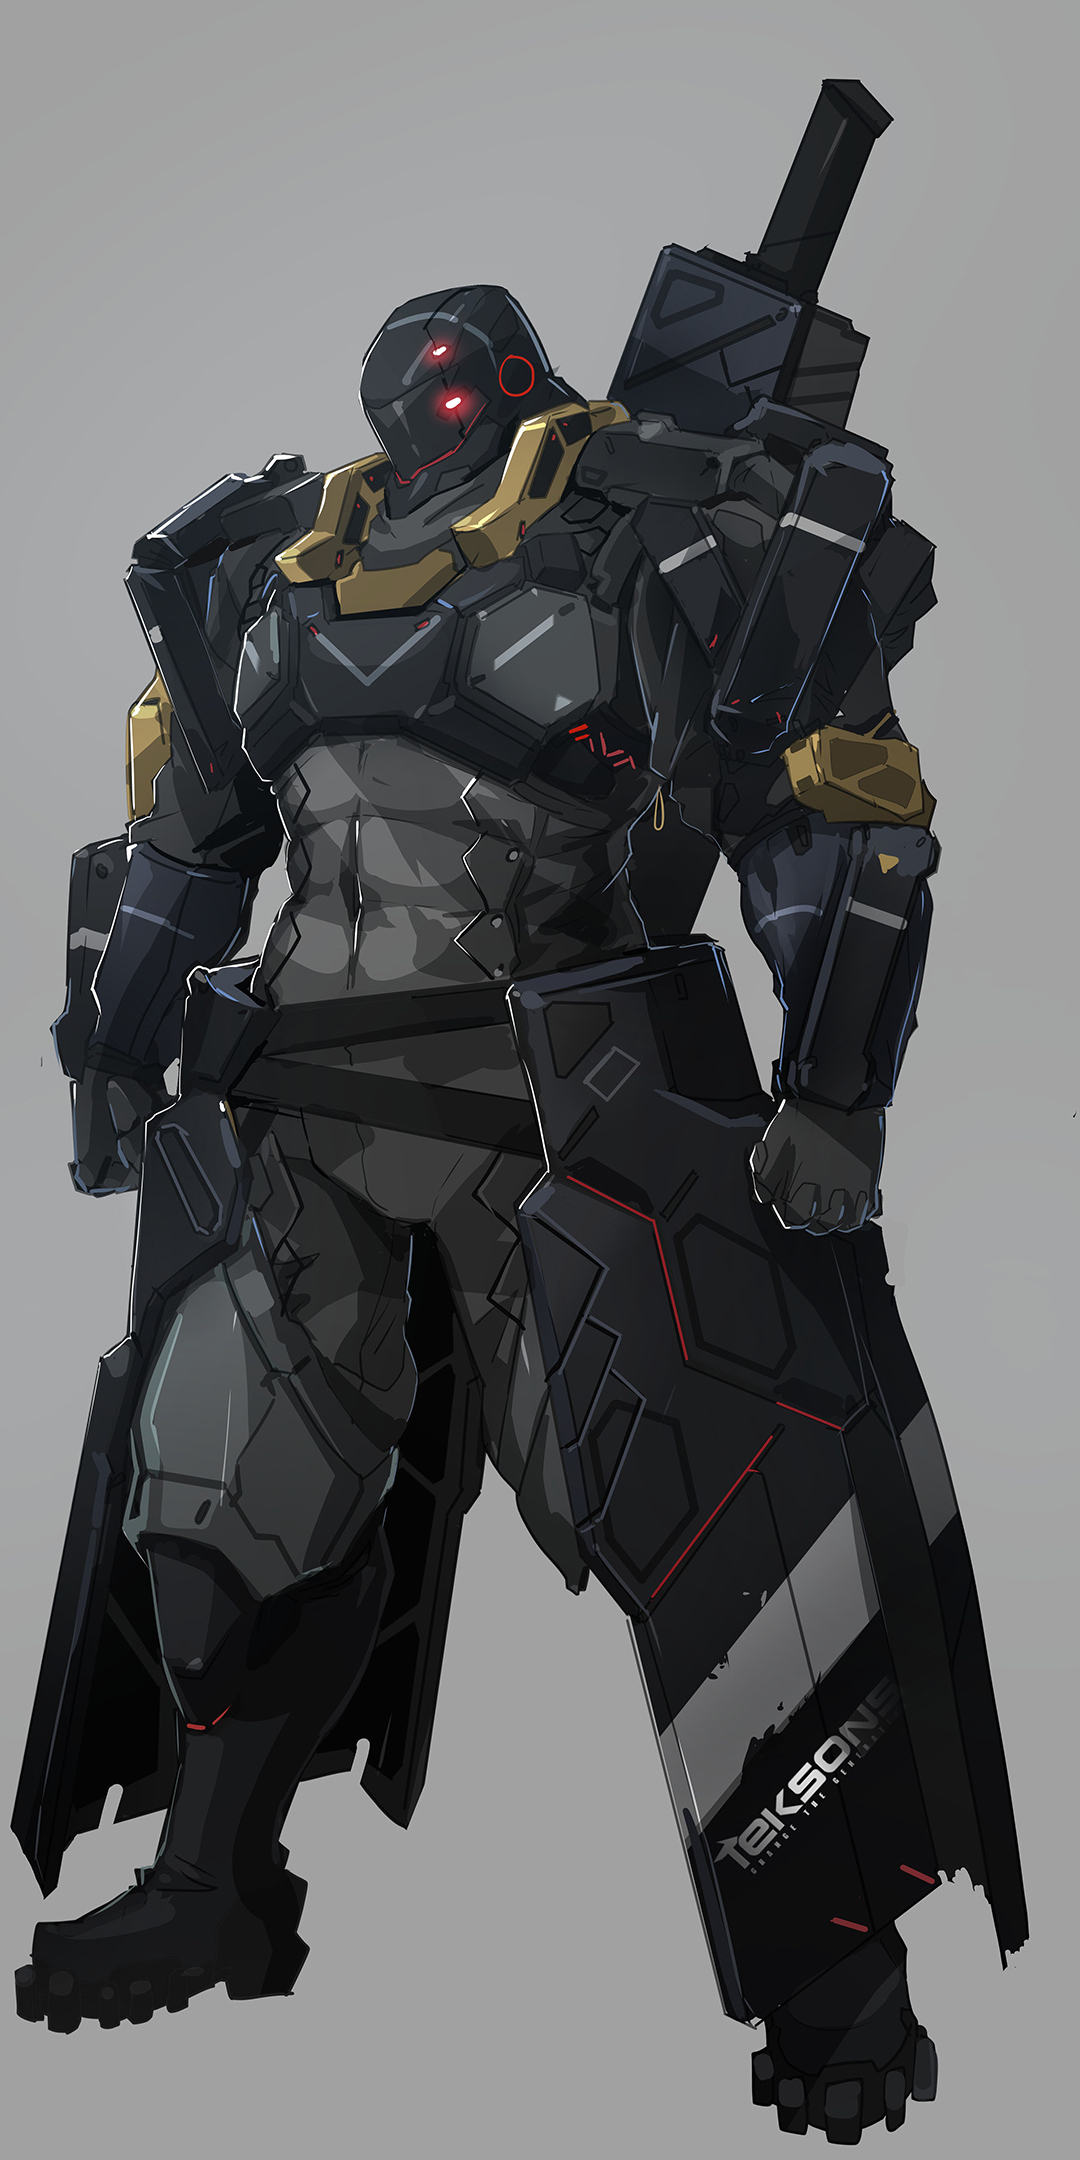 Armour Suit, Armored gull, anime, 1080x2160 wallpaper